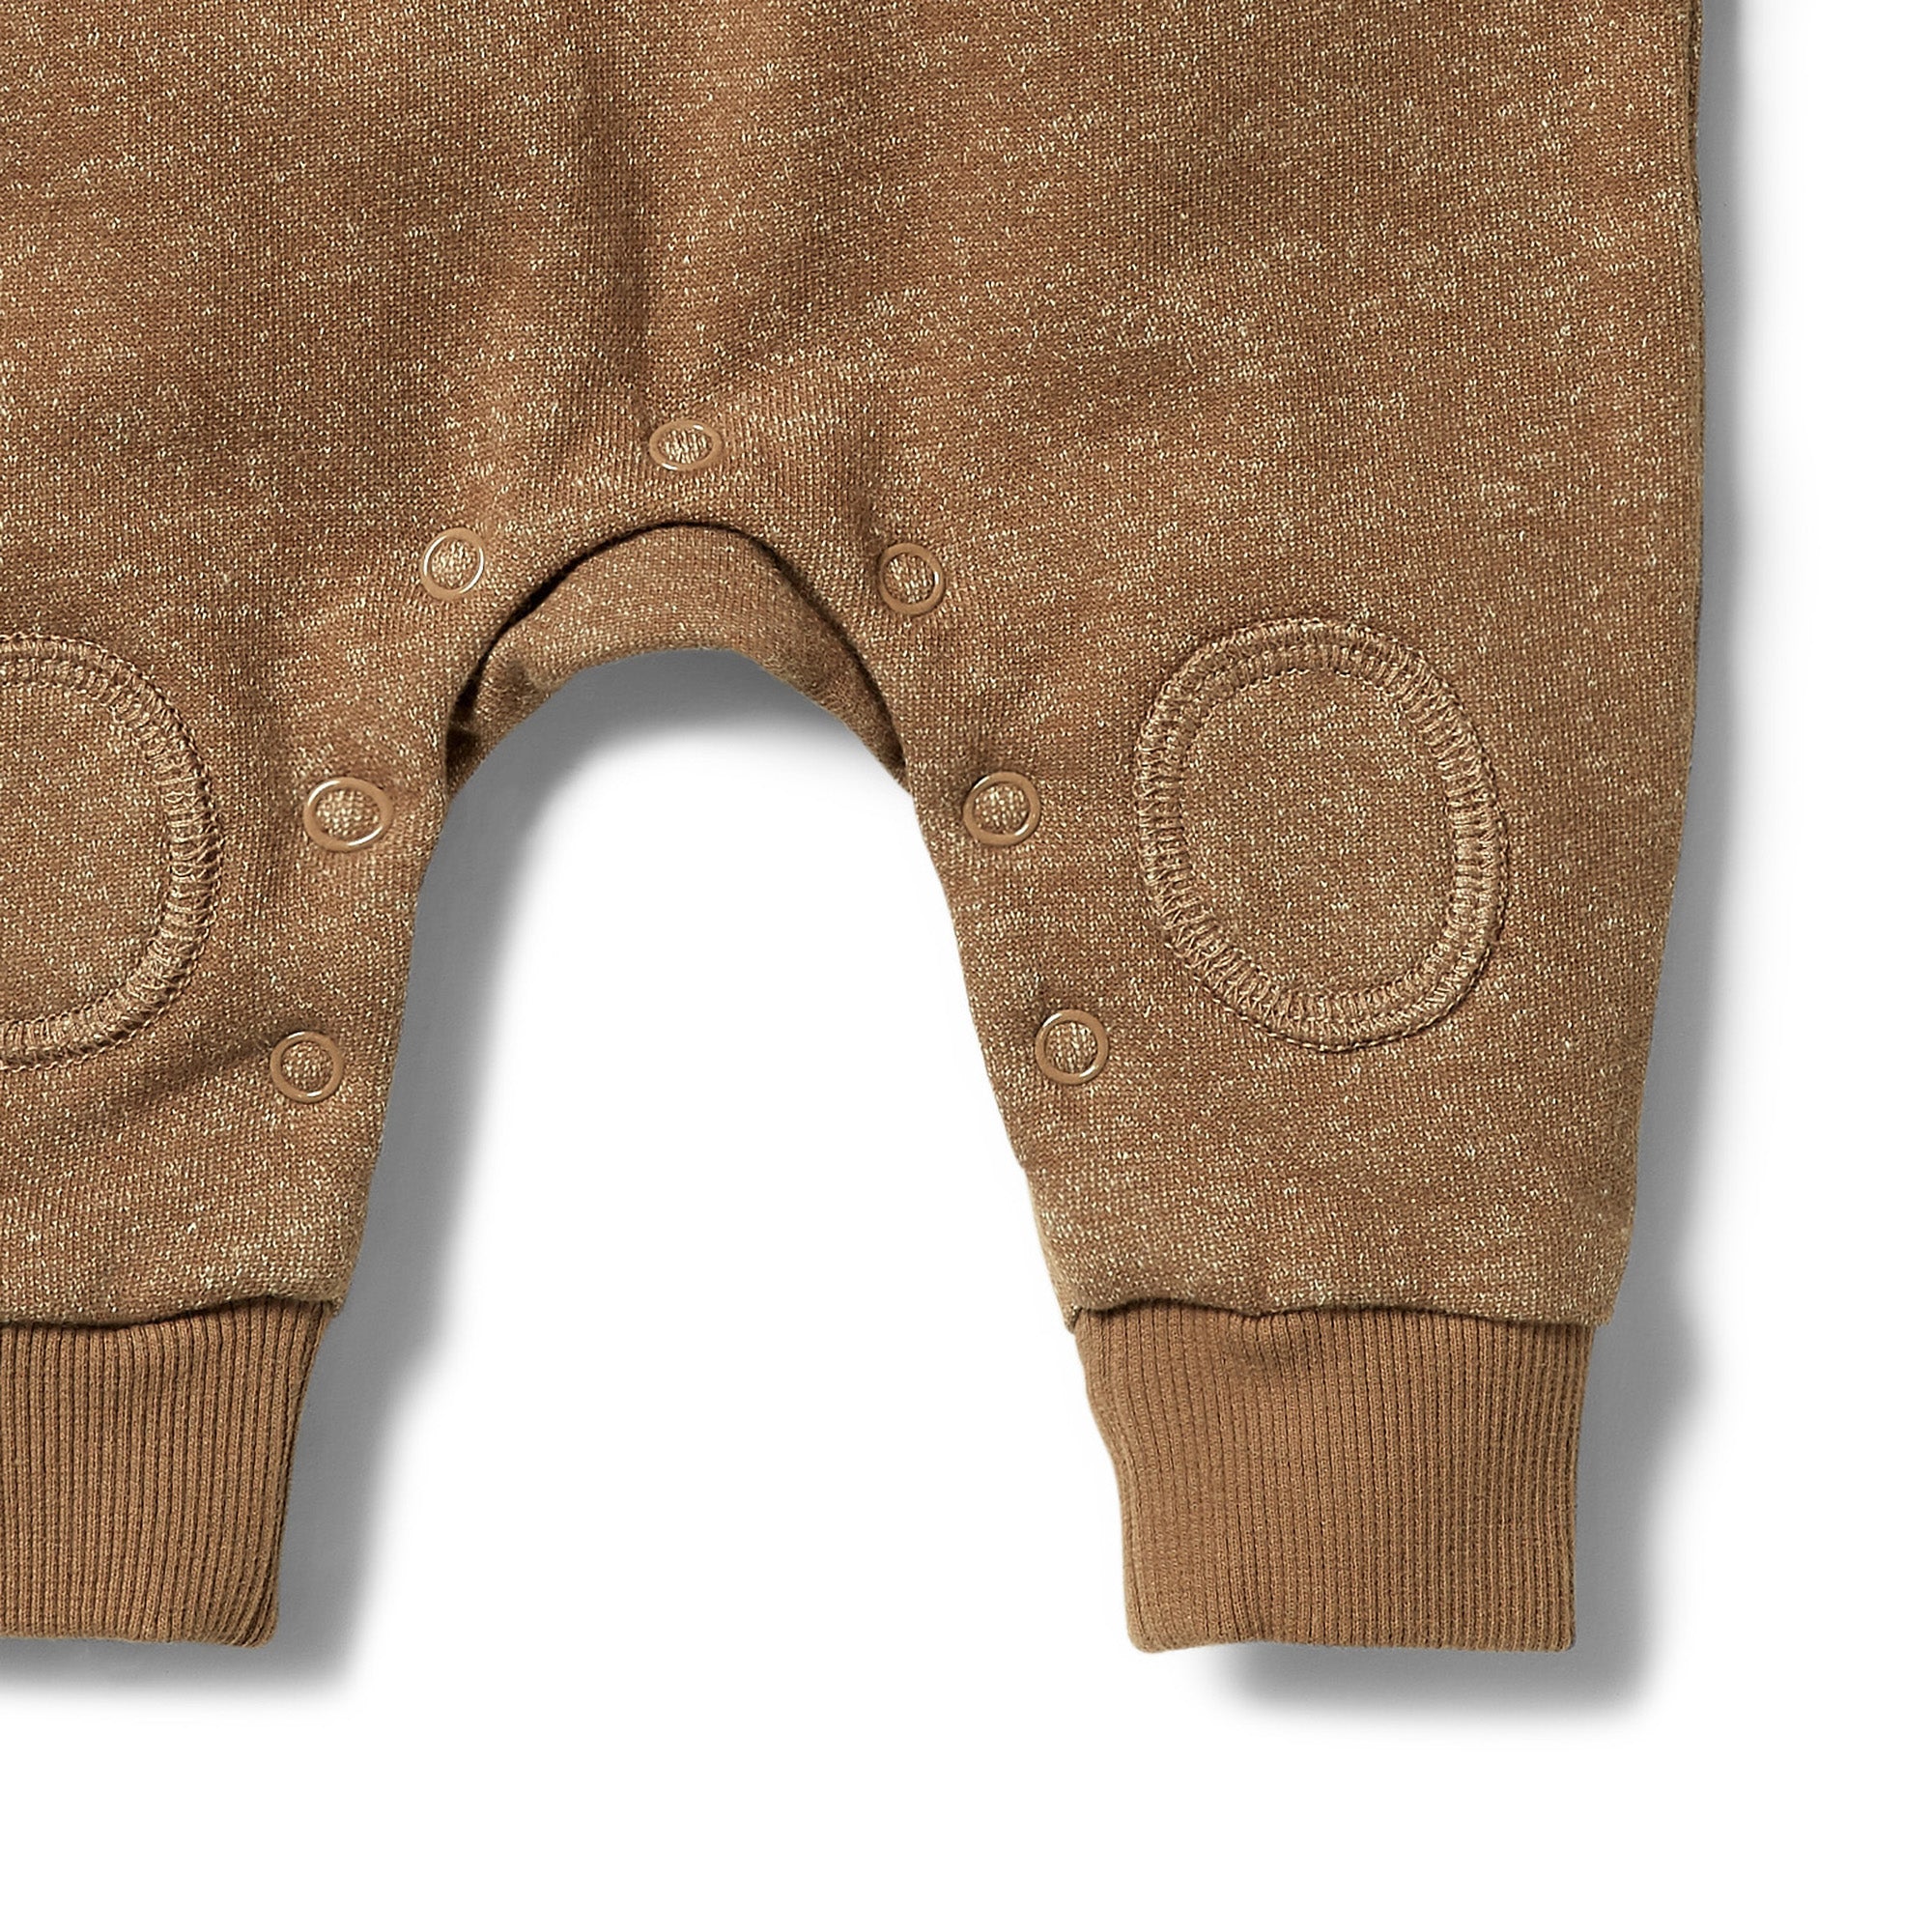 Organic French Terry Slouch Growsuit